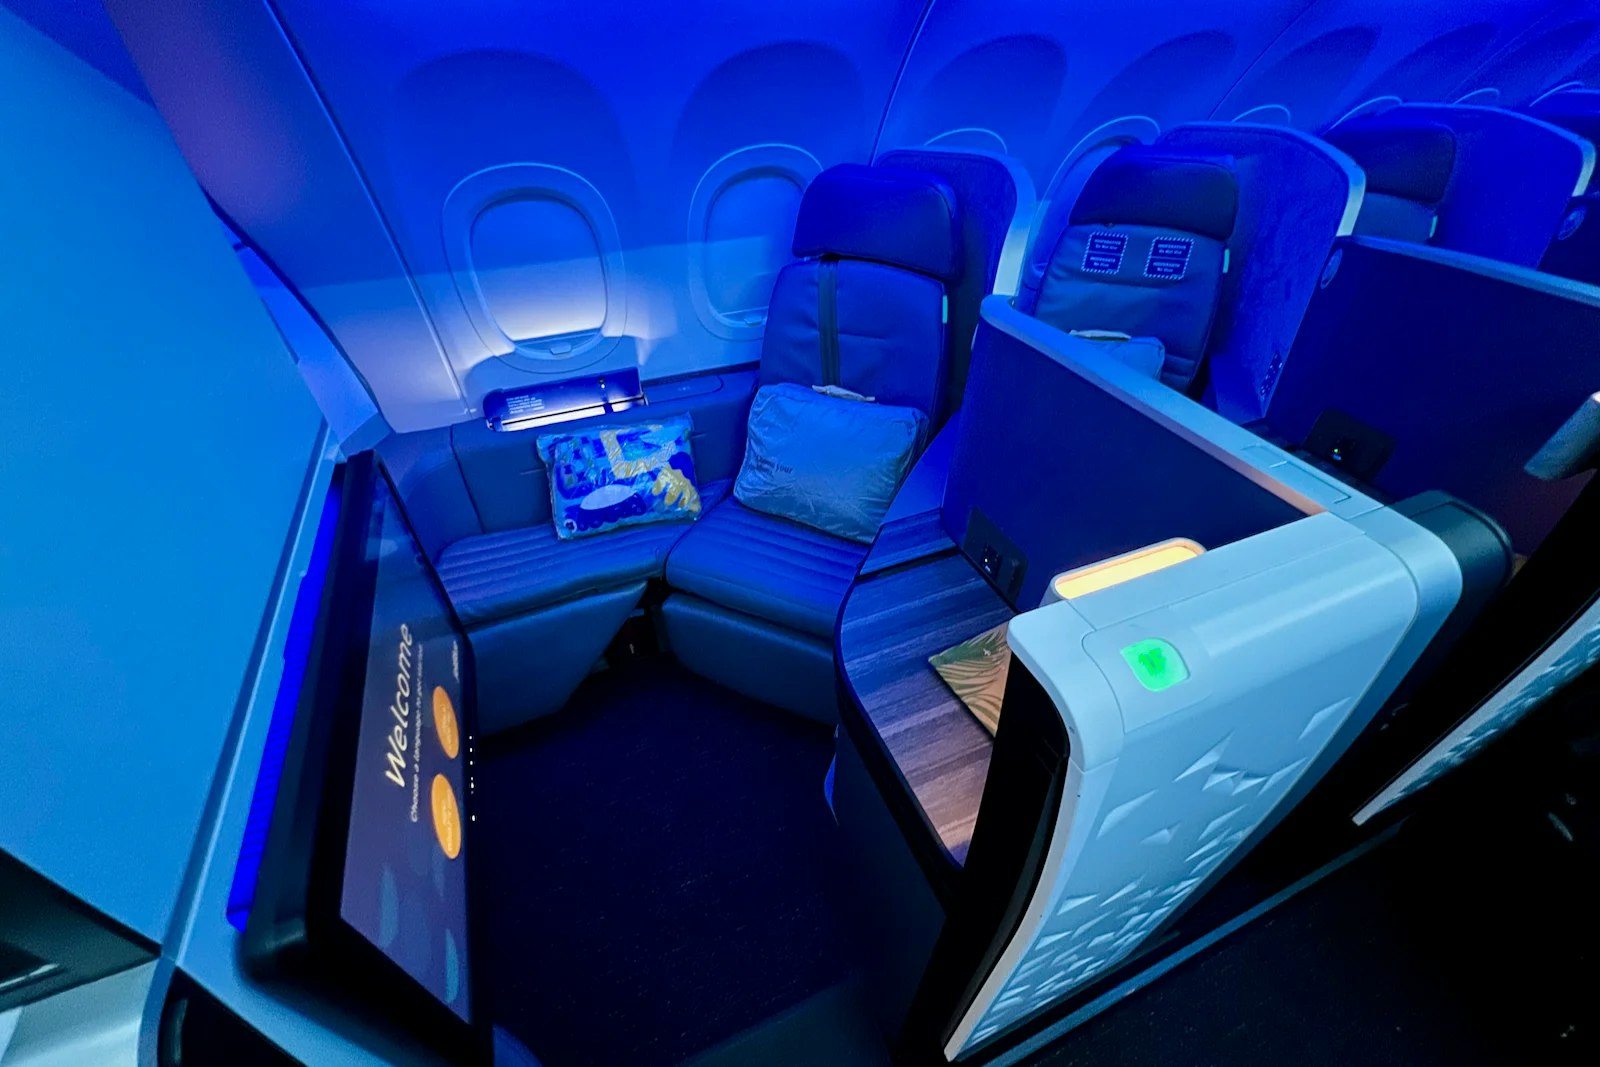 JetBlue's Mint Studio Suite from New York to London